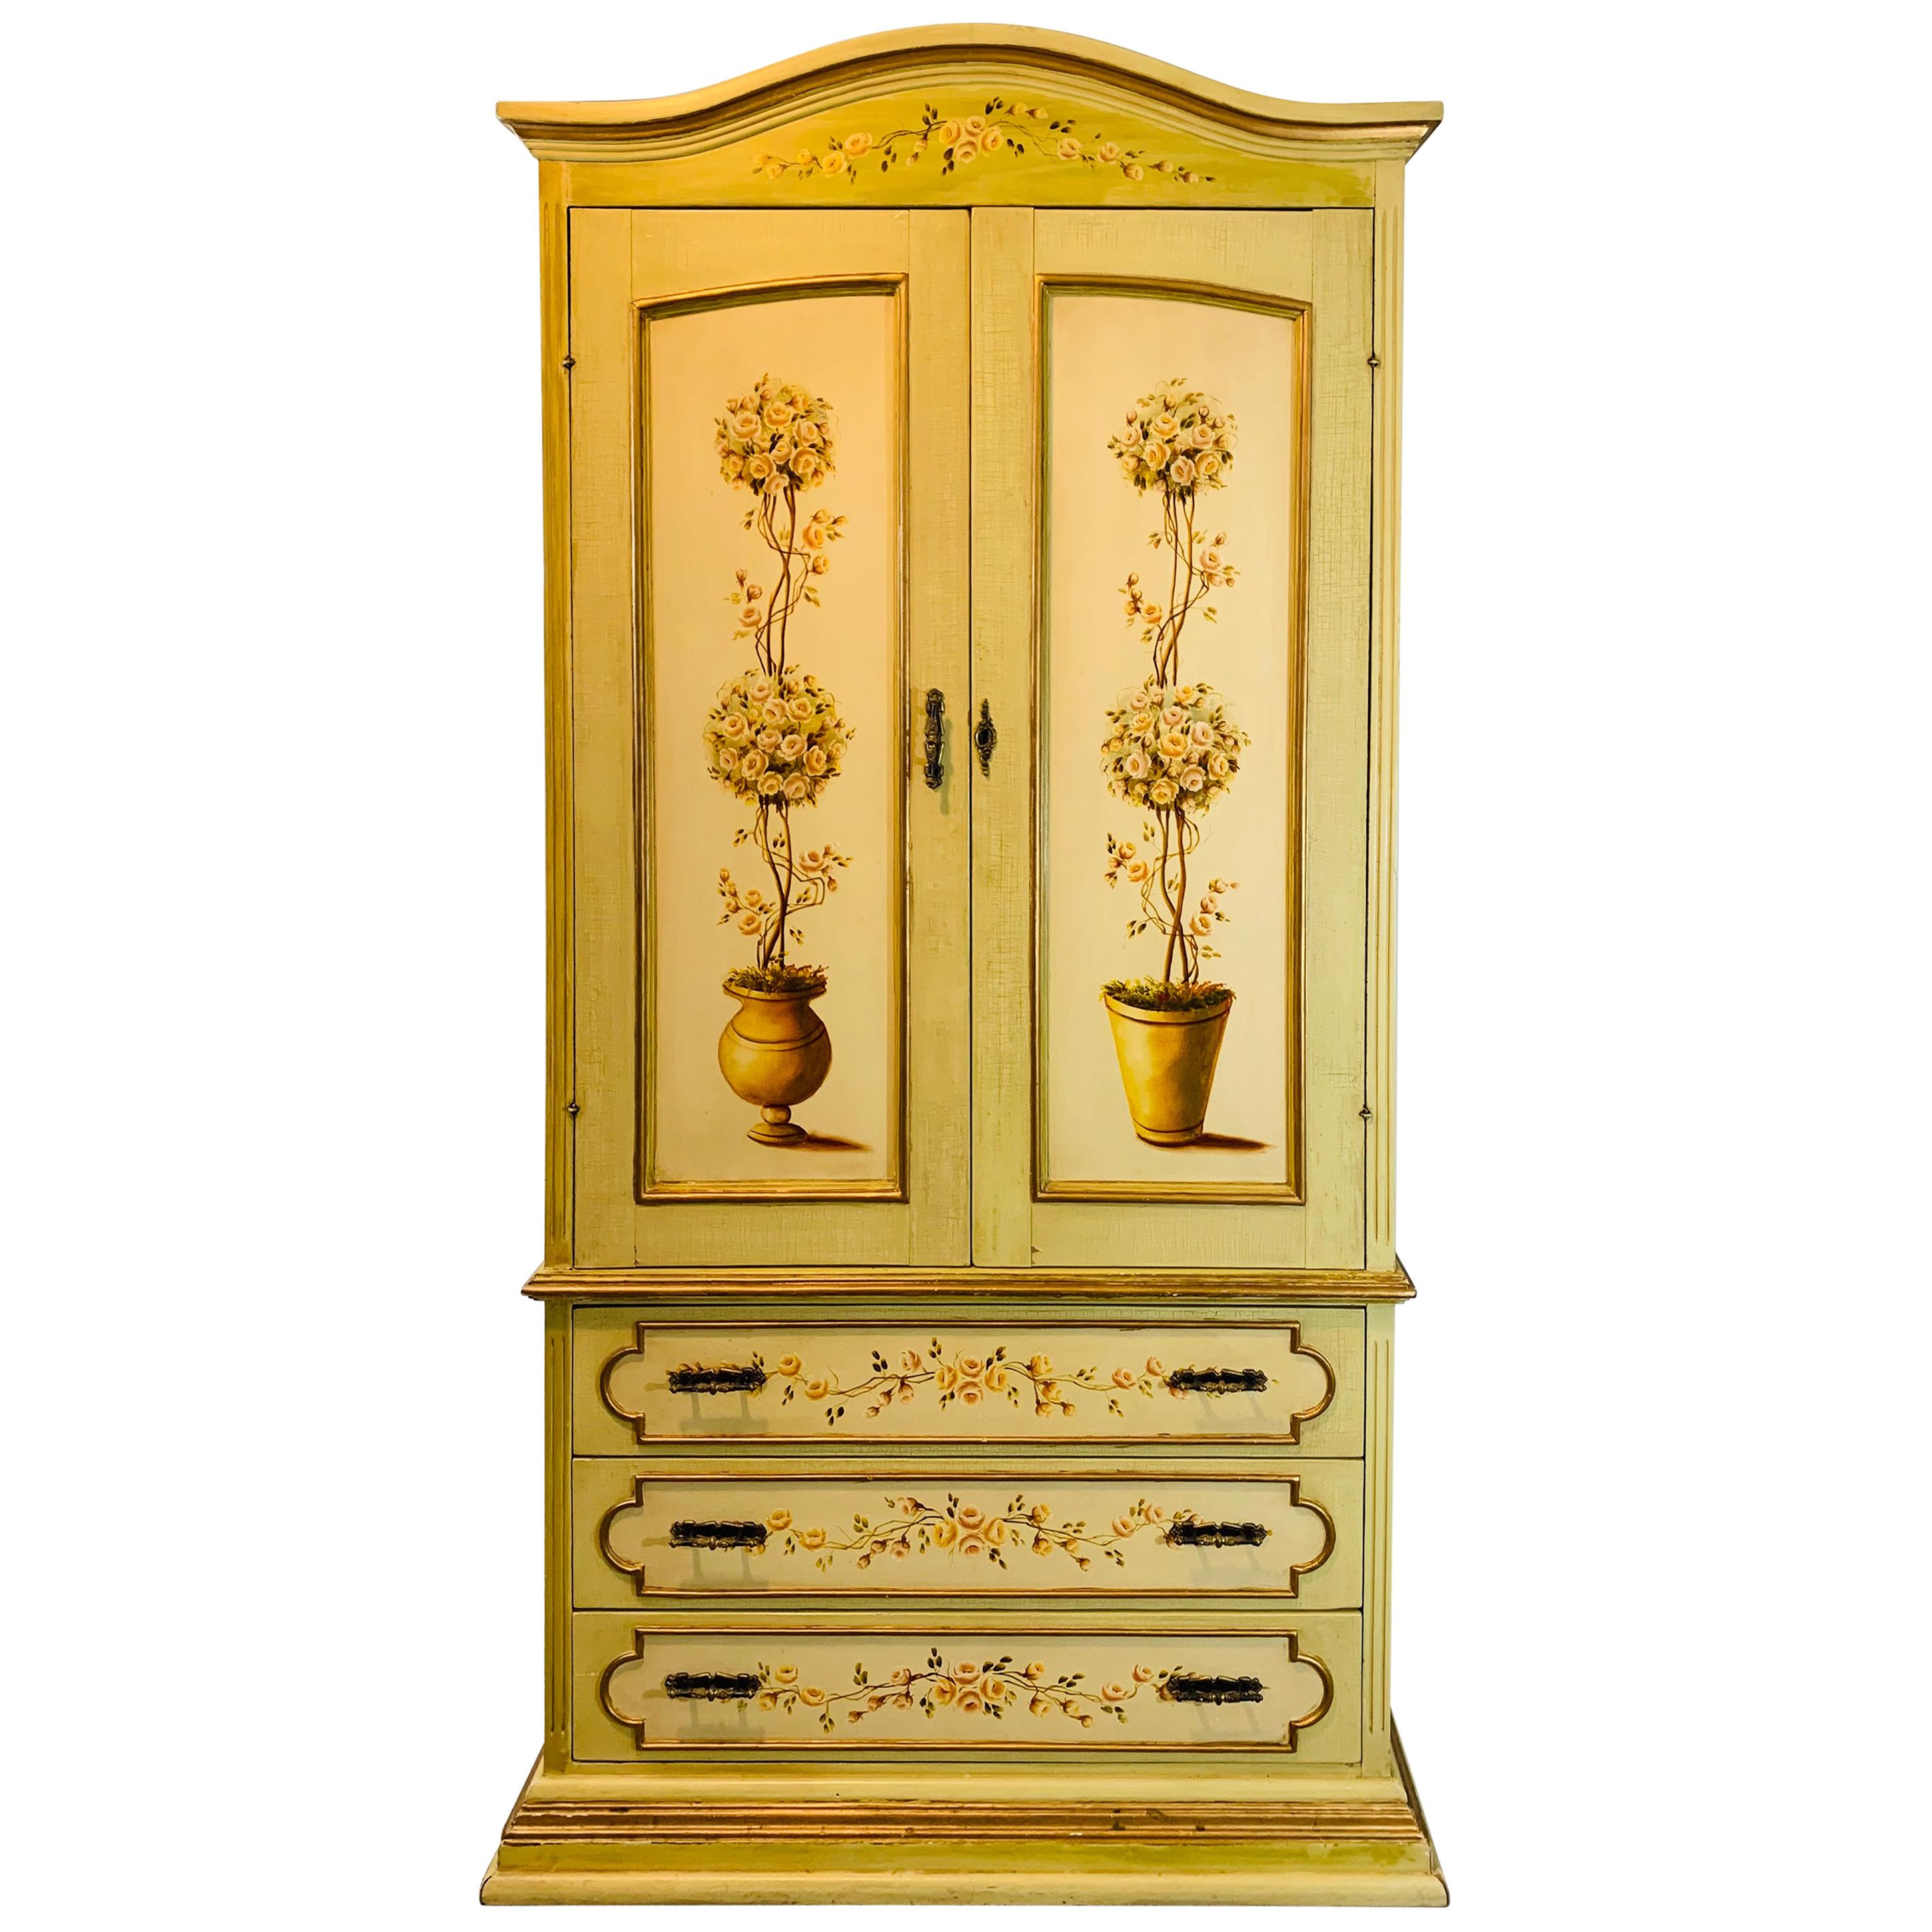 French Provincial Hand Painted Armoire or Cabinet